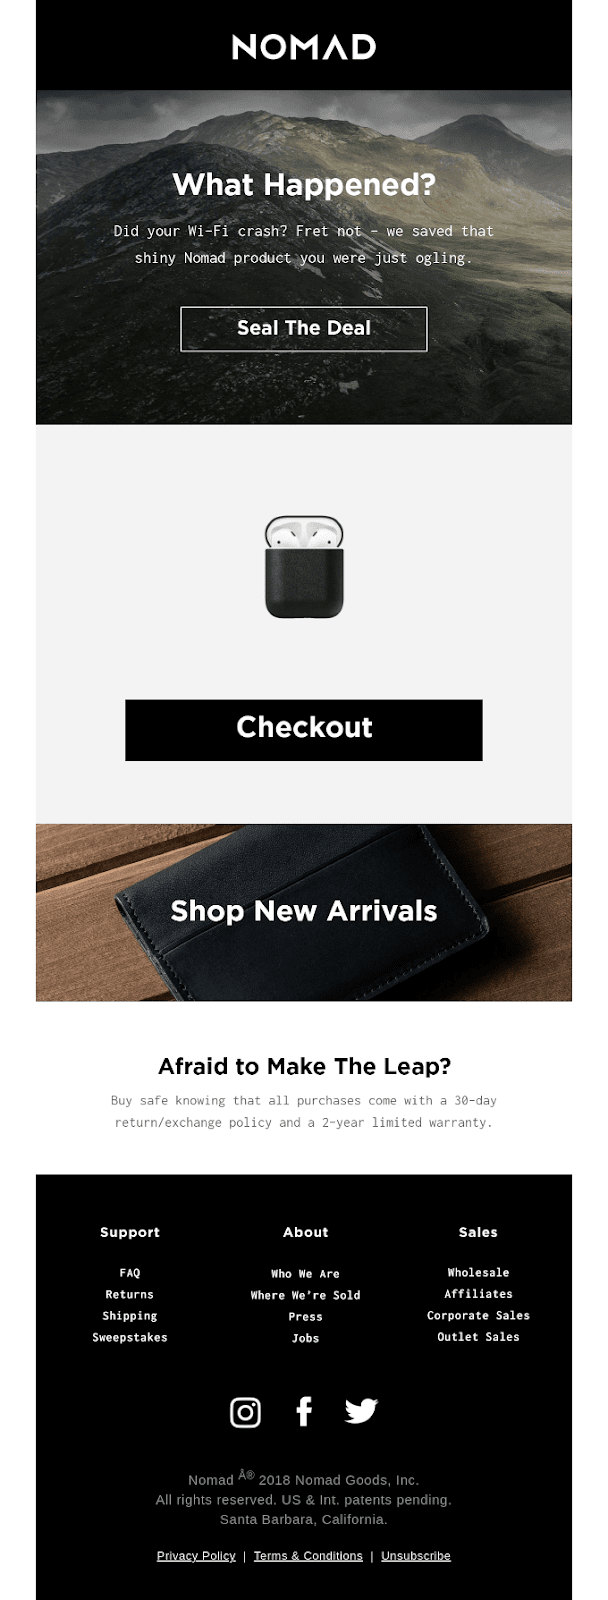 NOMAD abandoned cart email recovery example with lots of smart CTA copy and buttons